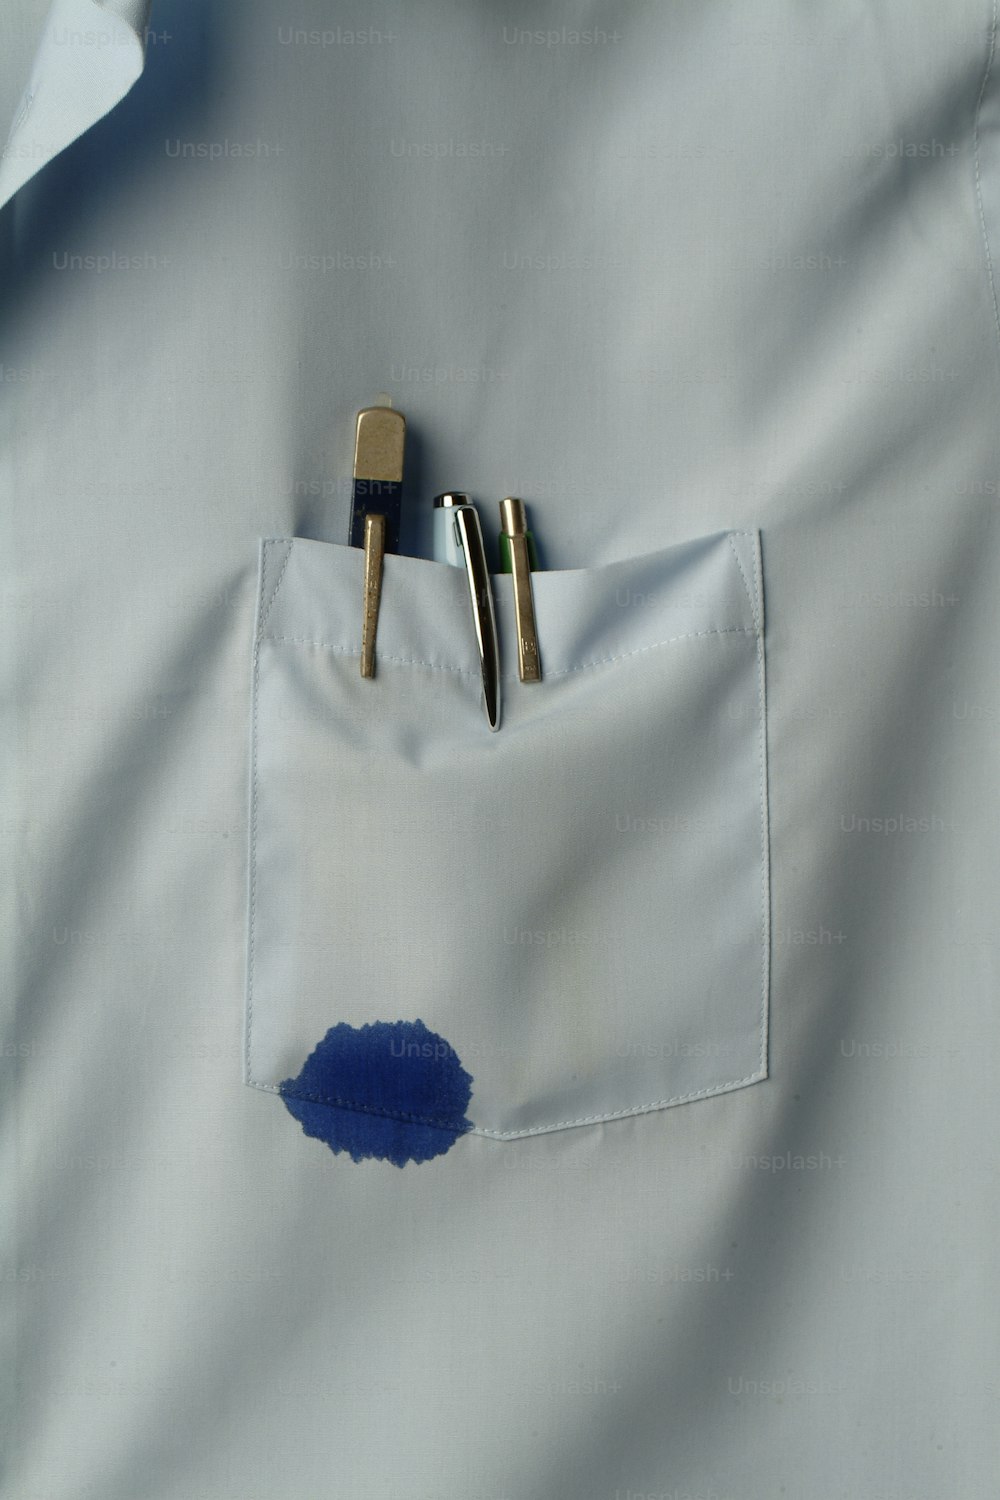 Close-up view of a shirt pocket that holds several pens, one of which leaks blue ink, California, 1970s. (Photo by Tom Kelley/Getty Images)